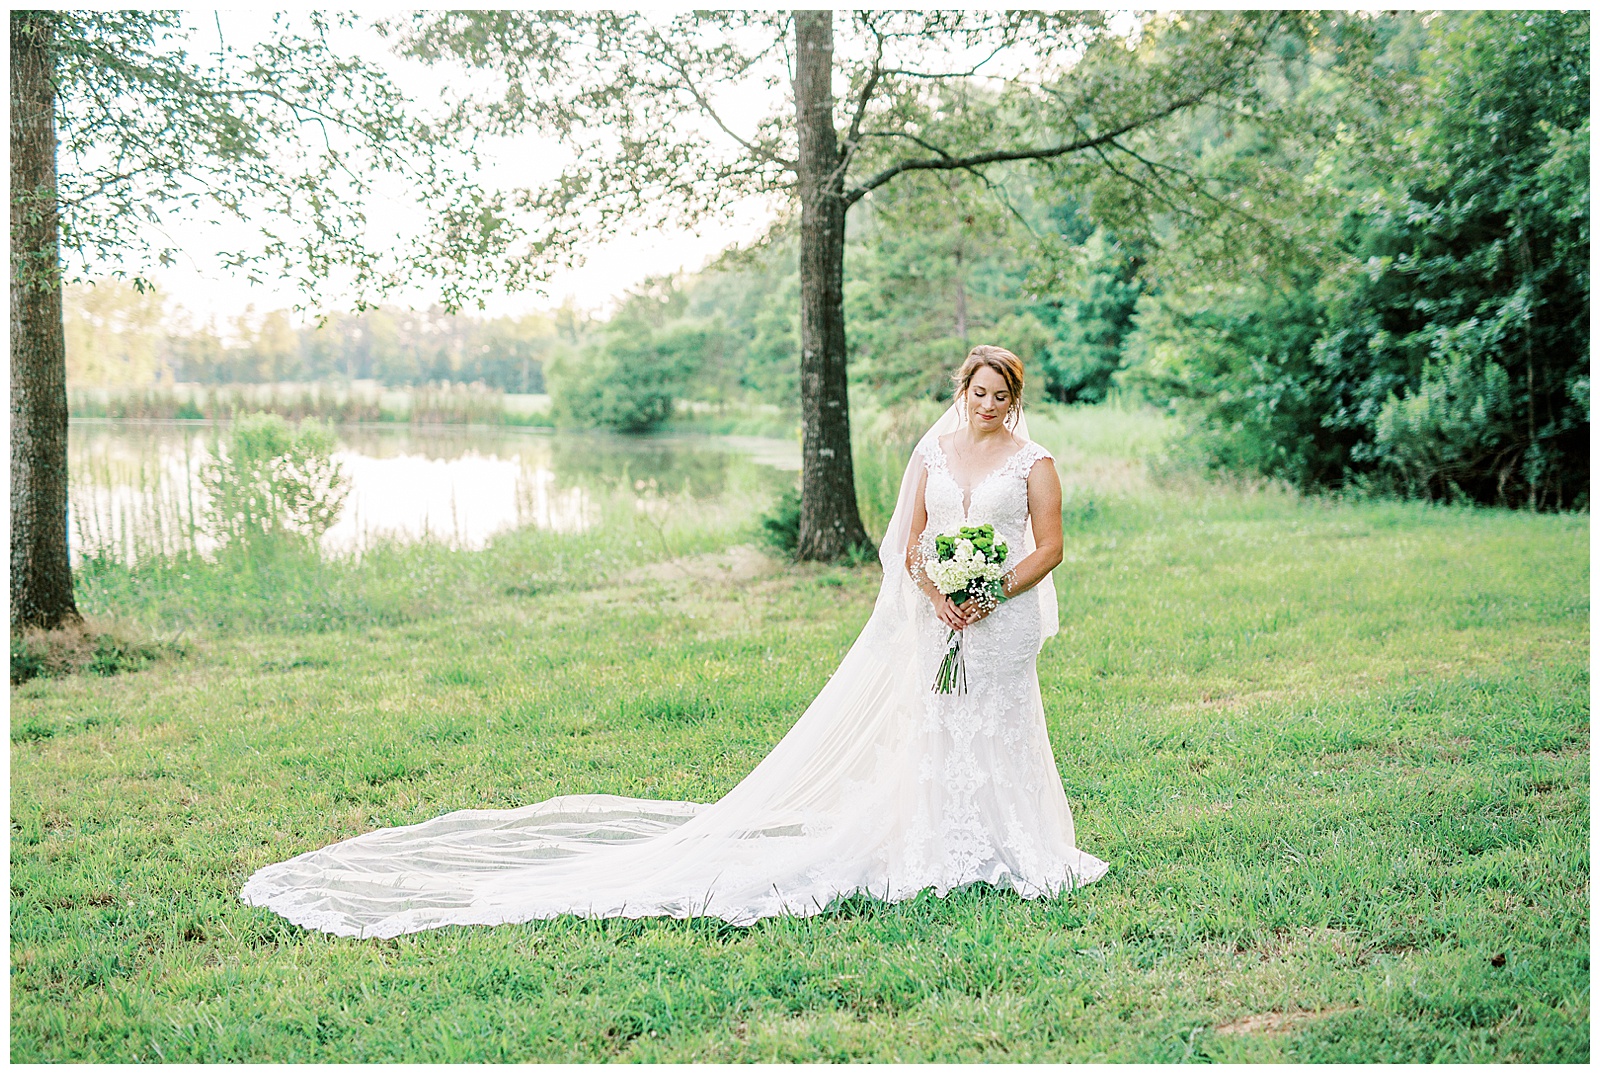 cathedral length veil from amazon and lace wedding dress from sunset bridal portraits in woods and field